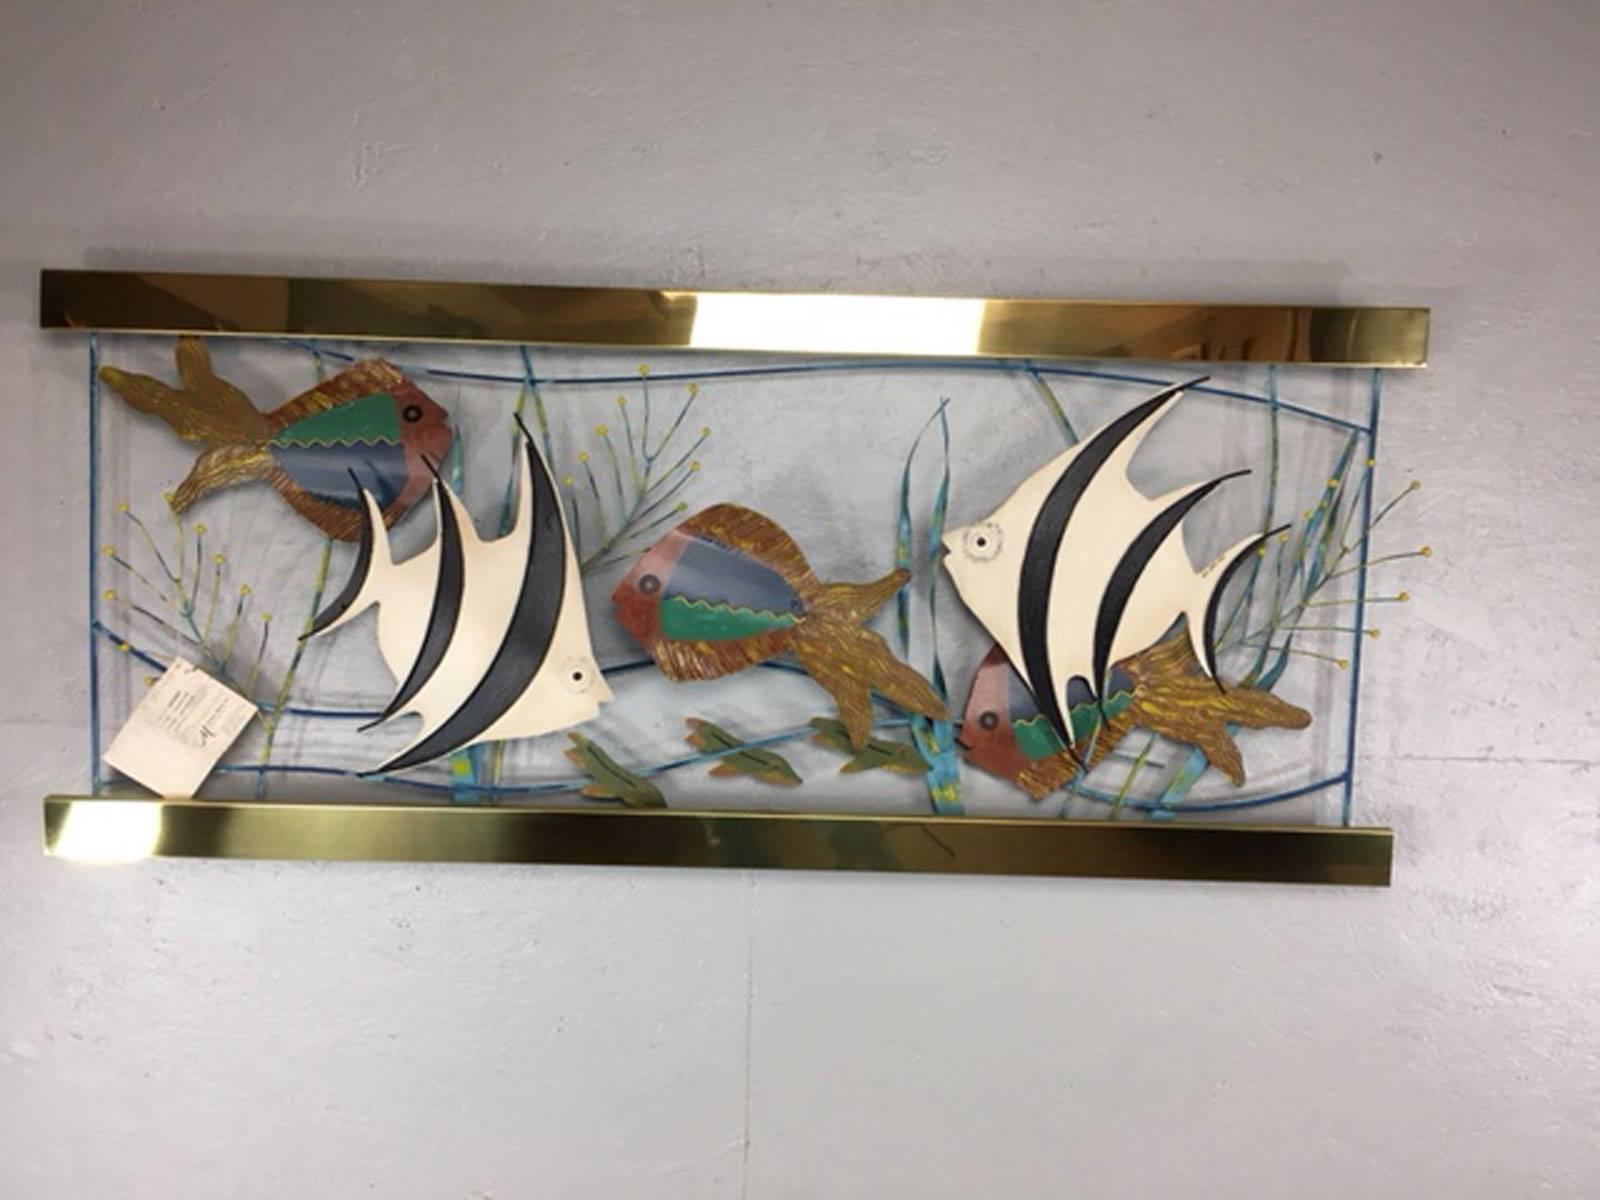 Titled aquarium and signed with original tags mixed metal tropical fish wall sculpture by Curtis Jere, 1993.